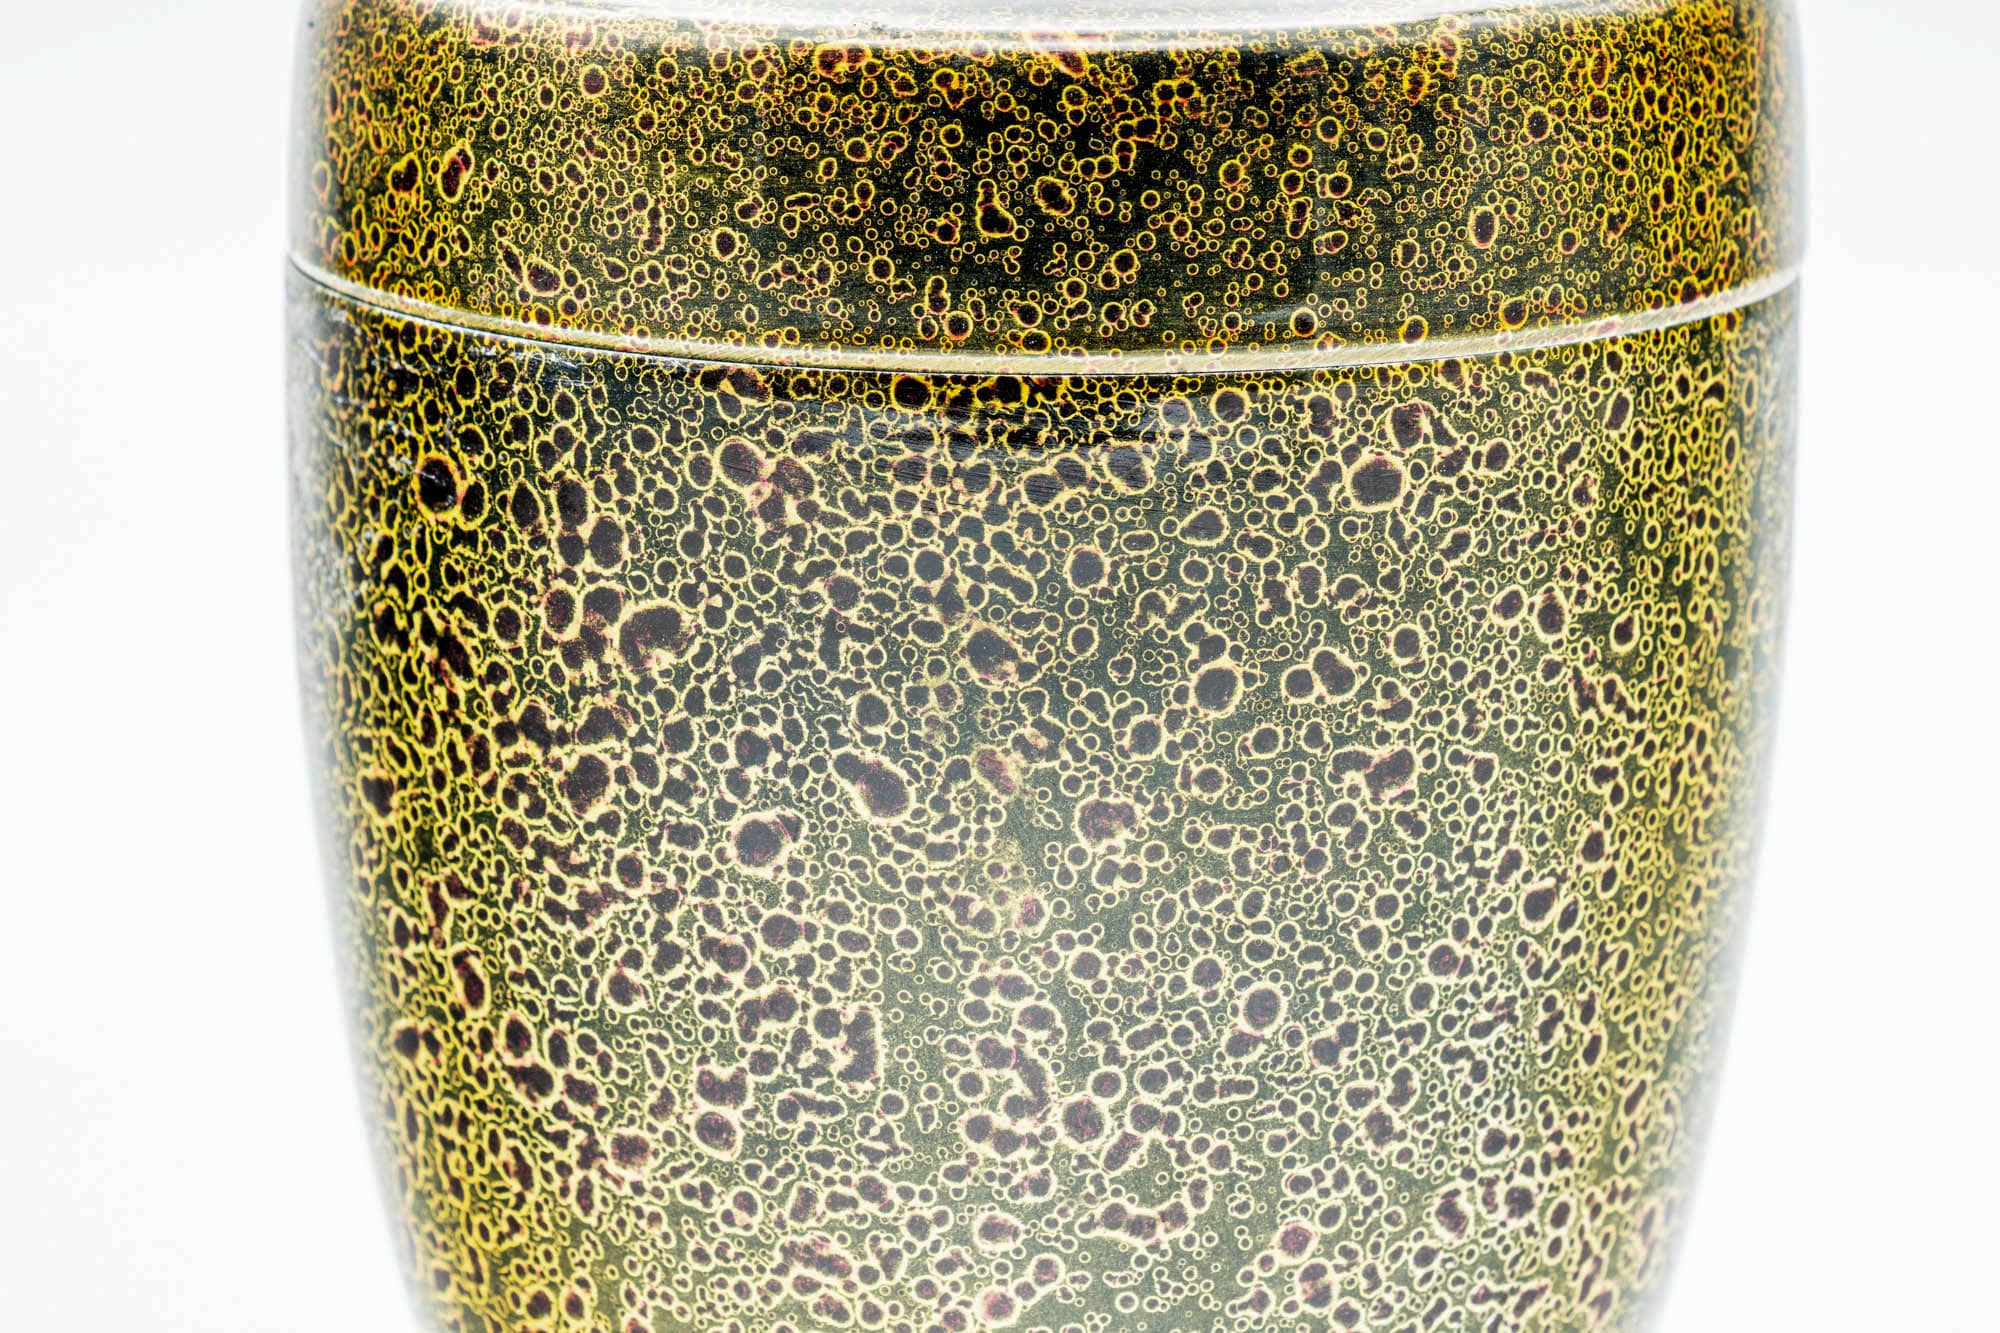 Japanese Chazutsu - Black Gold Speckled Plastic Tea Canister - 300ml